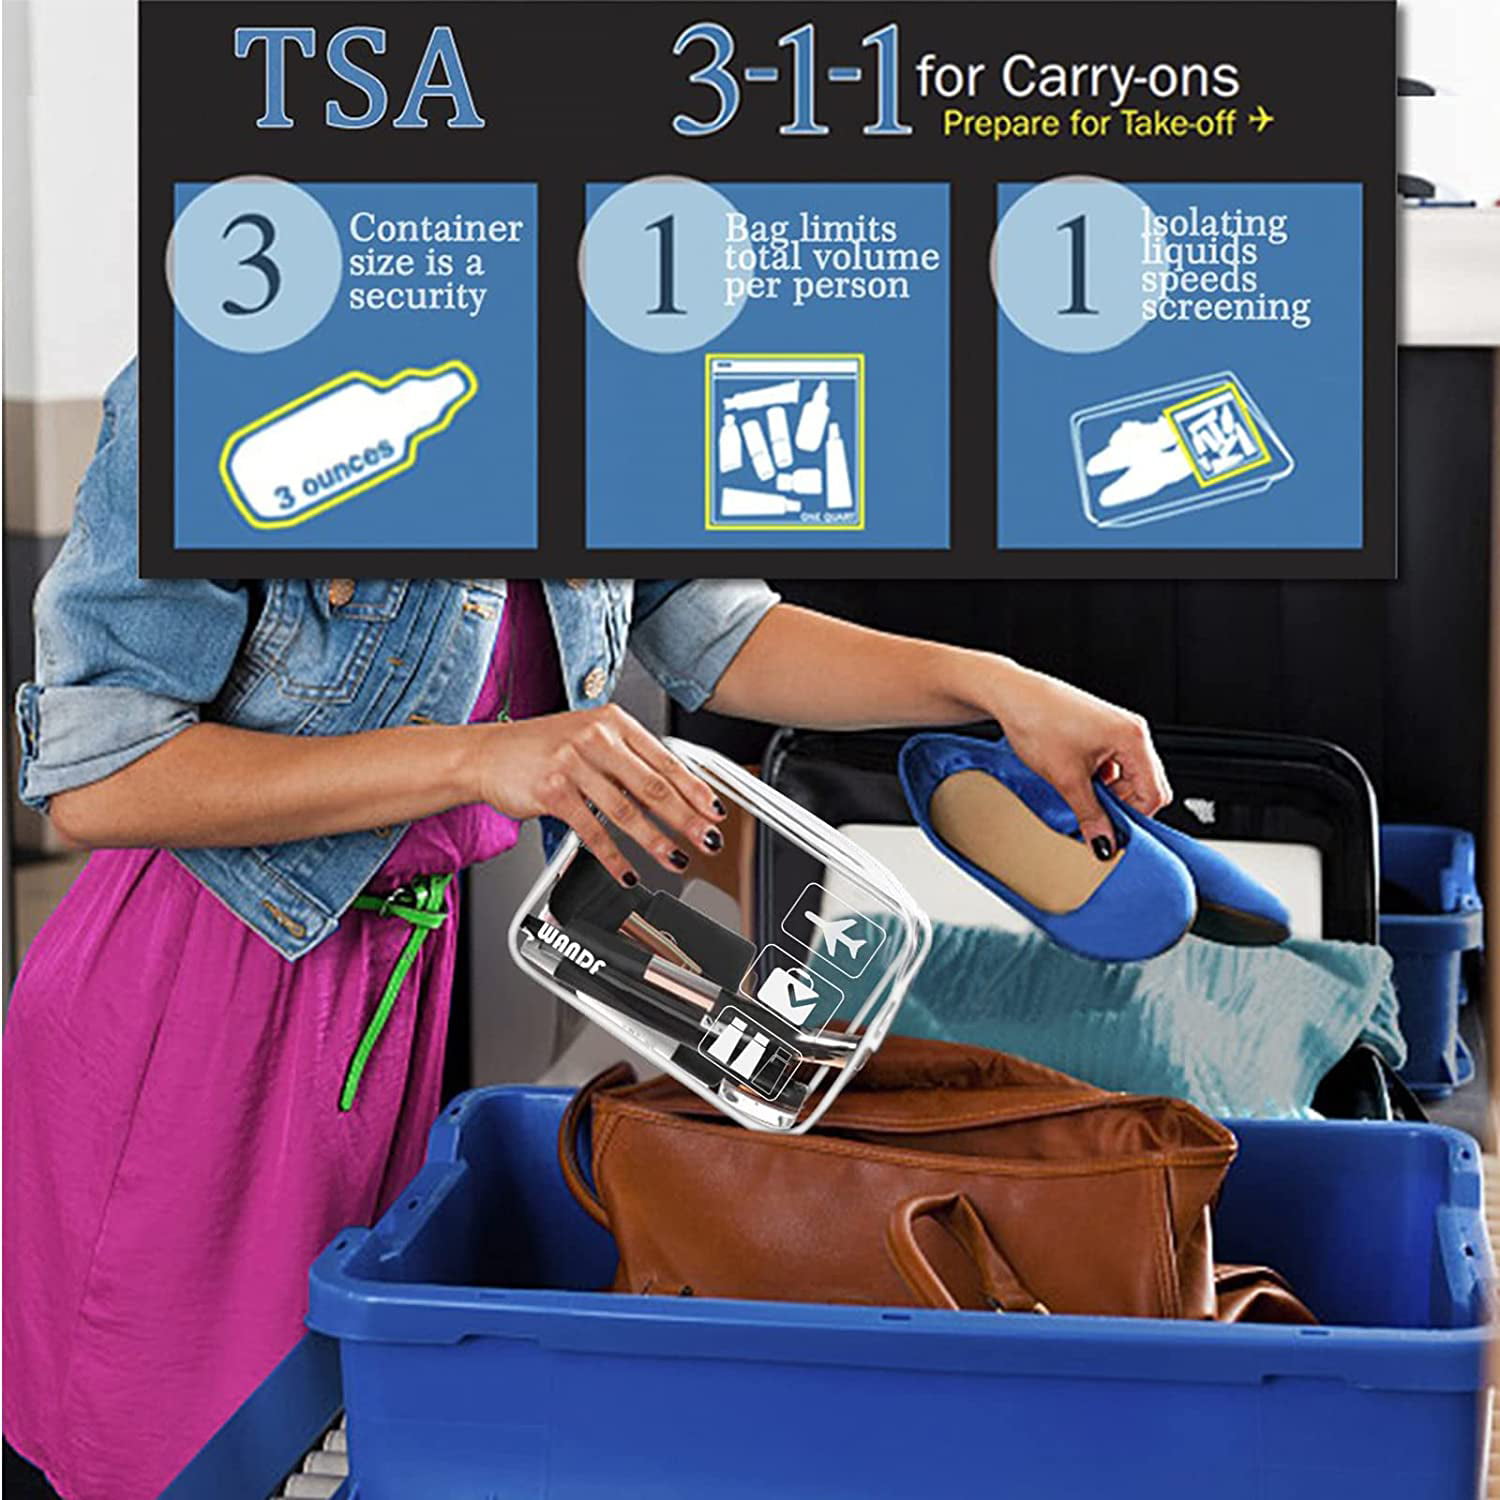 Cableinth TSA Approved Clear Travel Toiletry Bag-Quart Sized with  Zipper-Airport Airline Compliant Bag/Bottles-Men's/Women's 3-1-1 Kit+Travel  (1